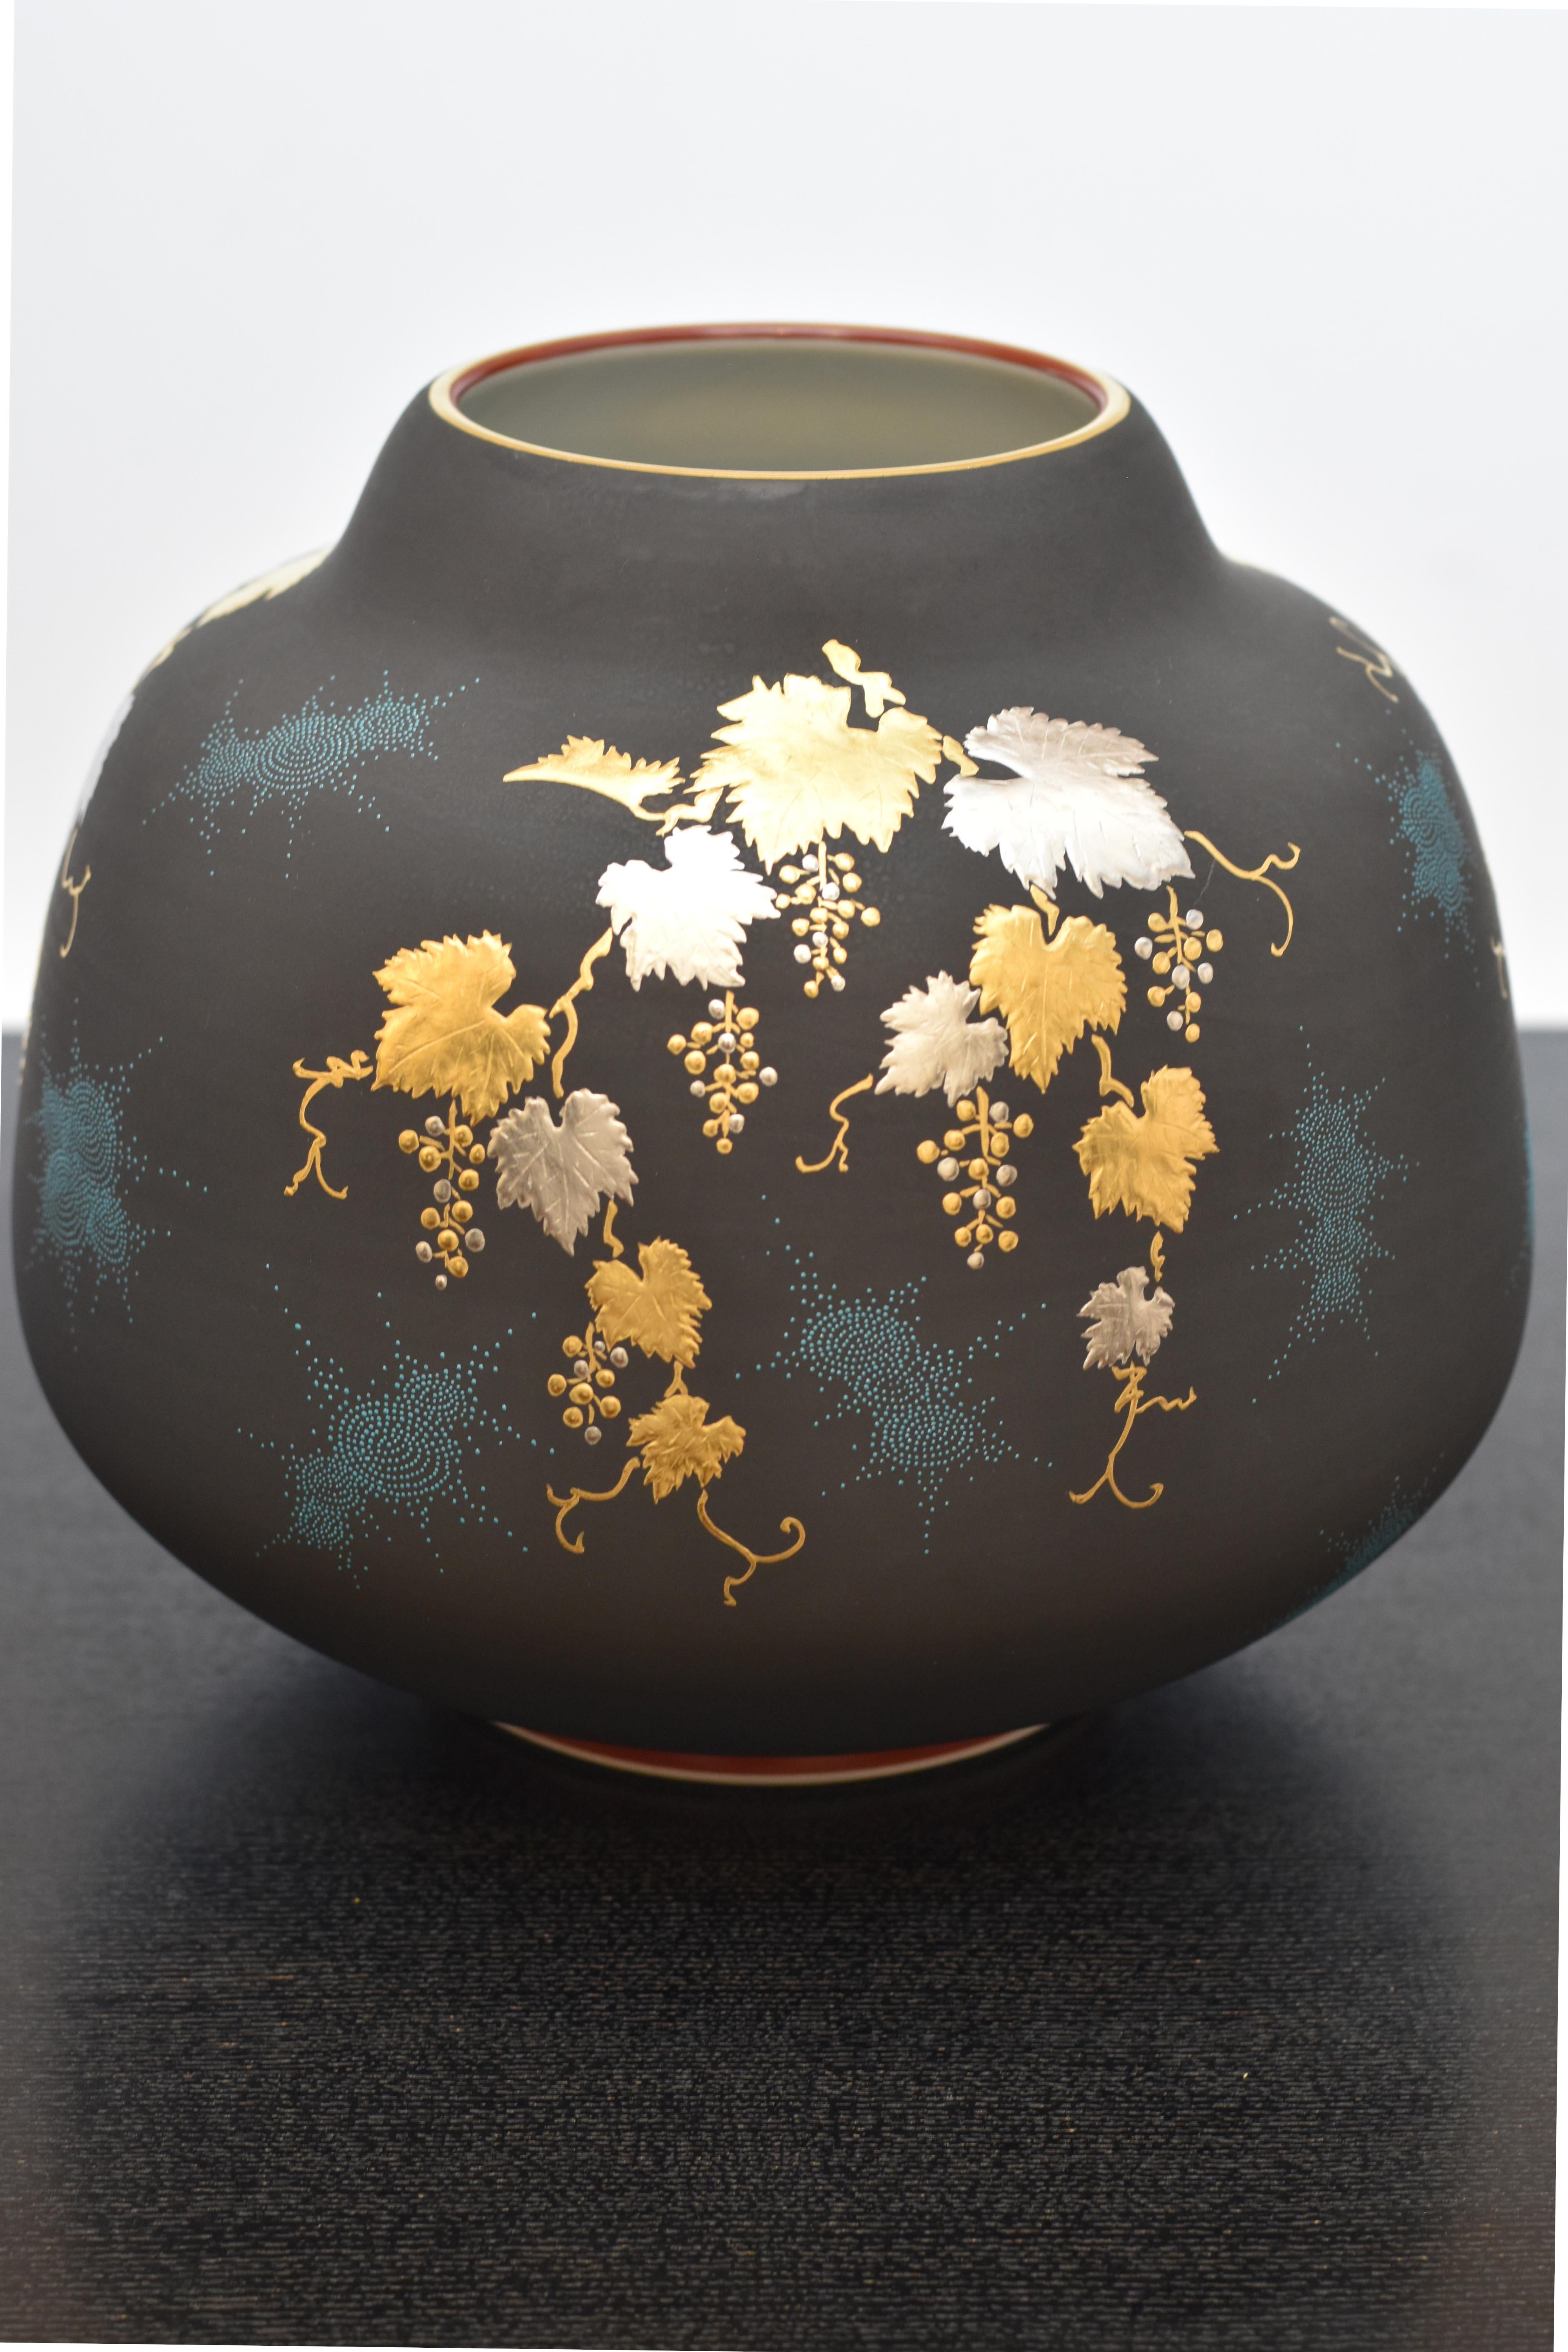 Exquisite museum quality signed Japanese contemporary porcelain vase, a masterpiece by a highly celebrated award-winning third-generation porcelain artist of the Kutani region of Japan featuring a cascade of grape vines rendered in pure gold and